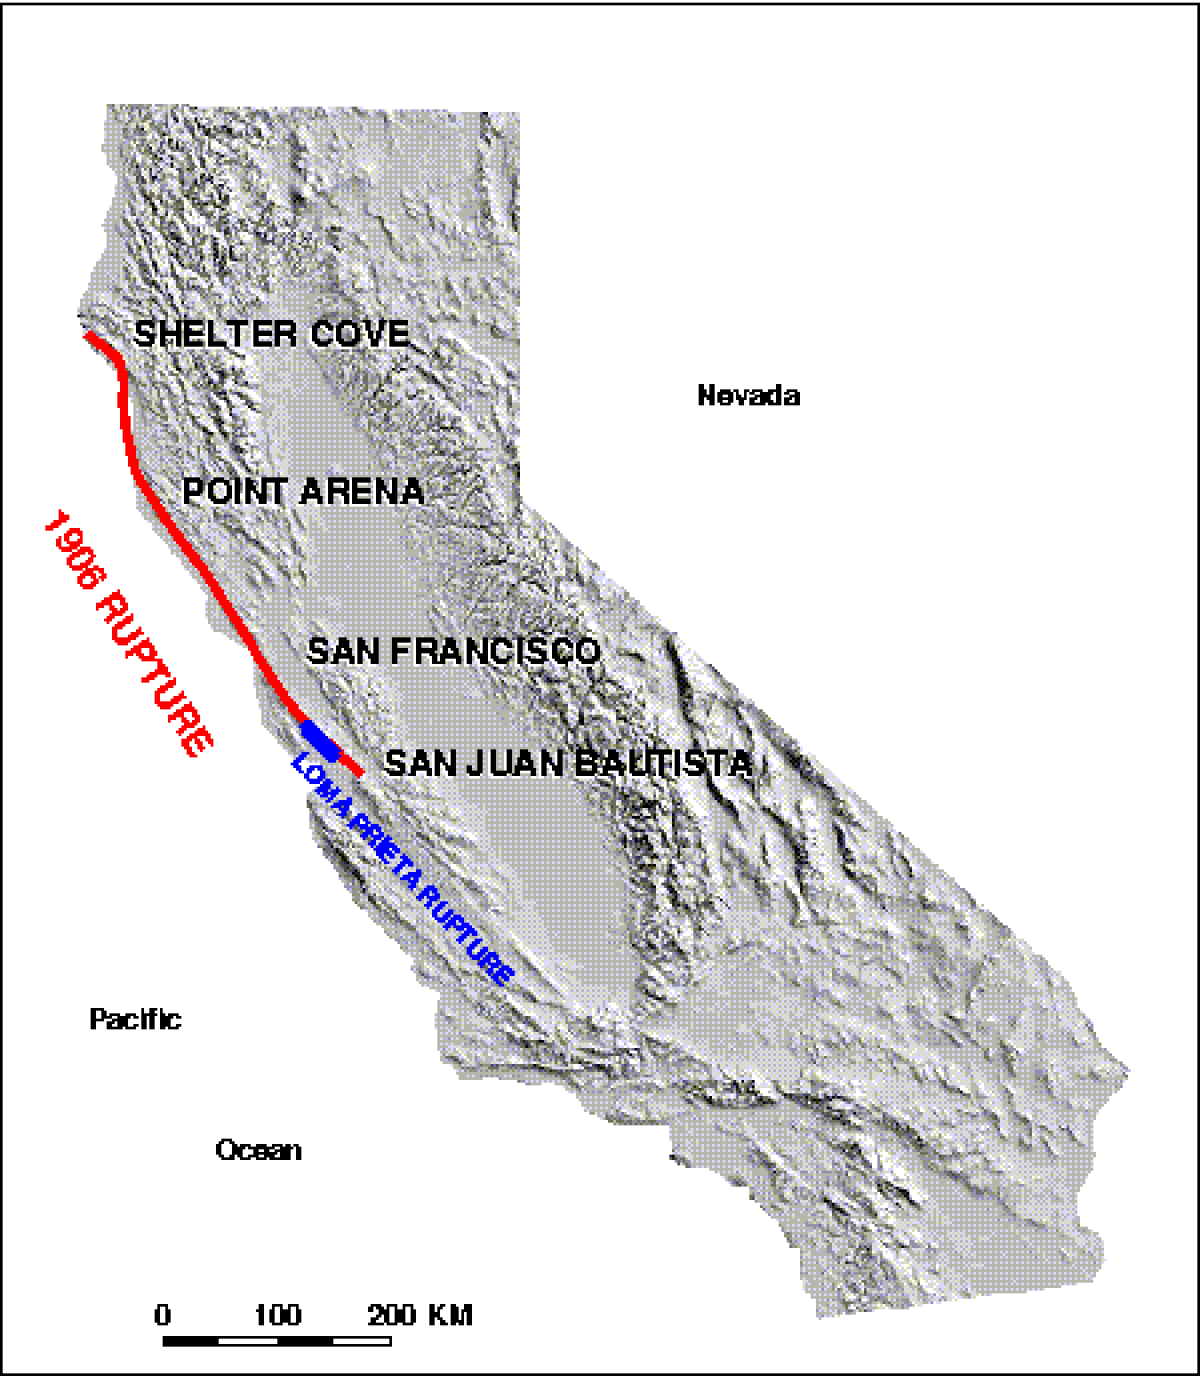 Map shows the extent of the 1906 rupture seen at the surface. The total length is 296 miles (477 kilometers). For comparison, the 1989 Loma Prieta earthquake had a rupture length of about 25 miles (40 km).